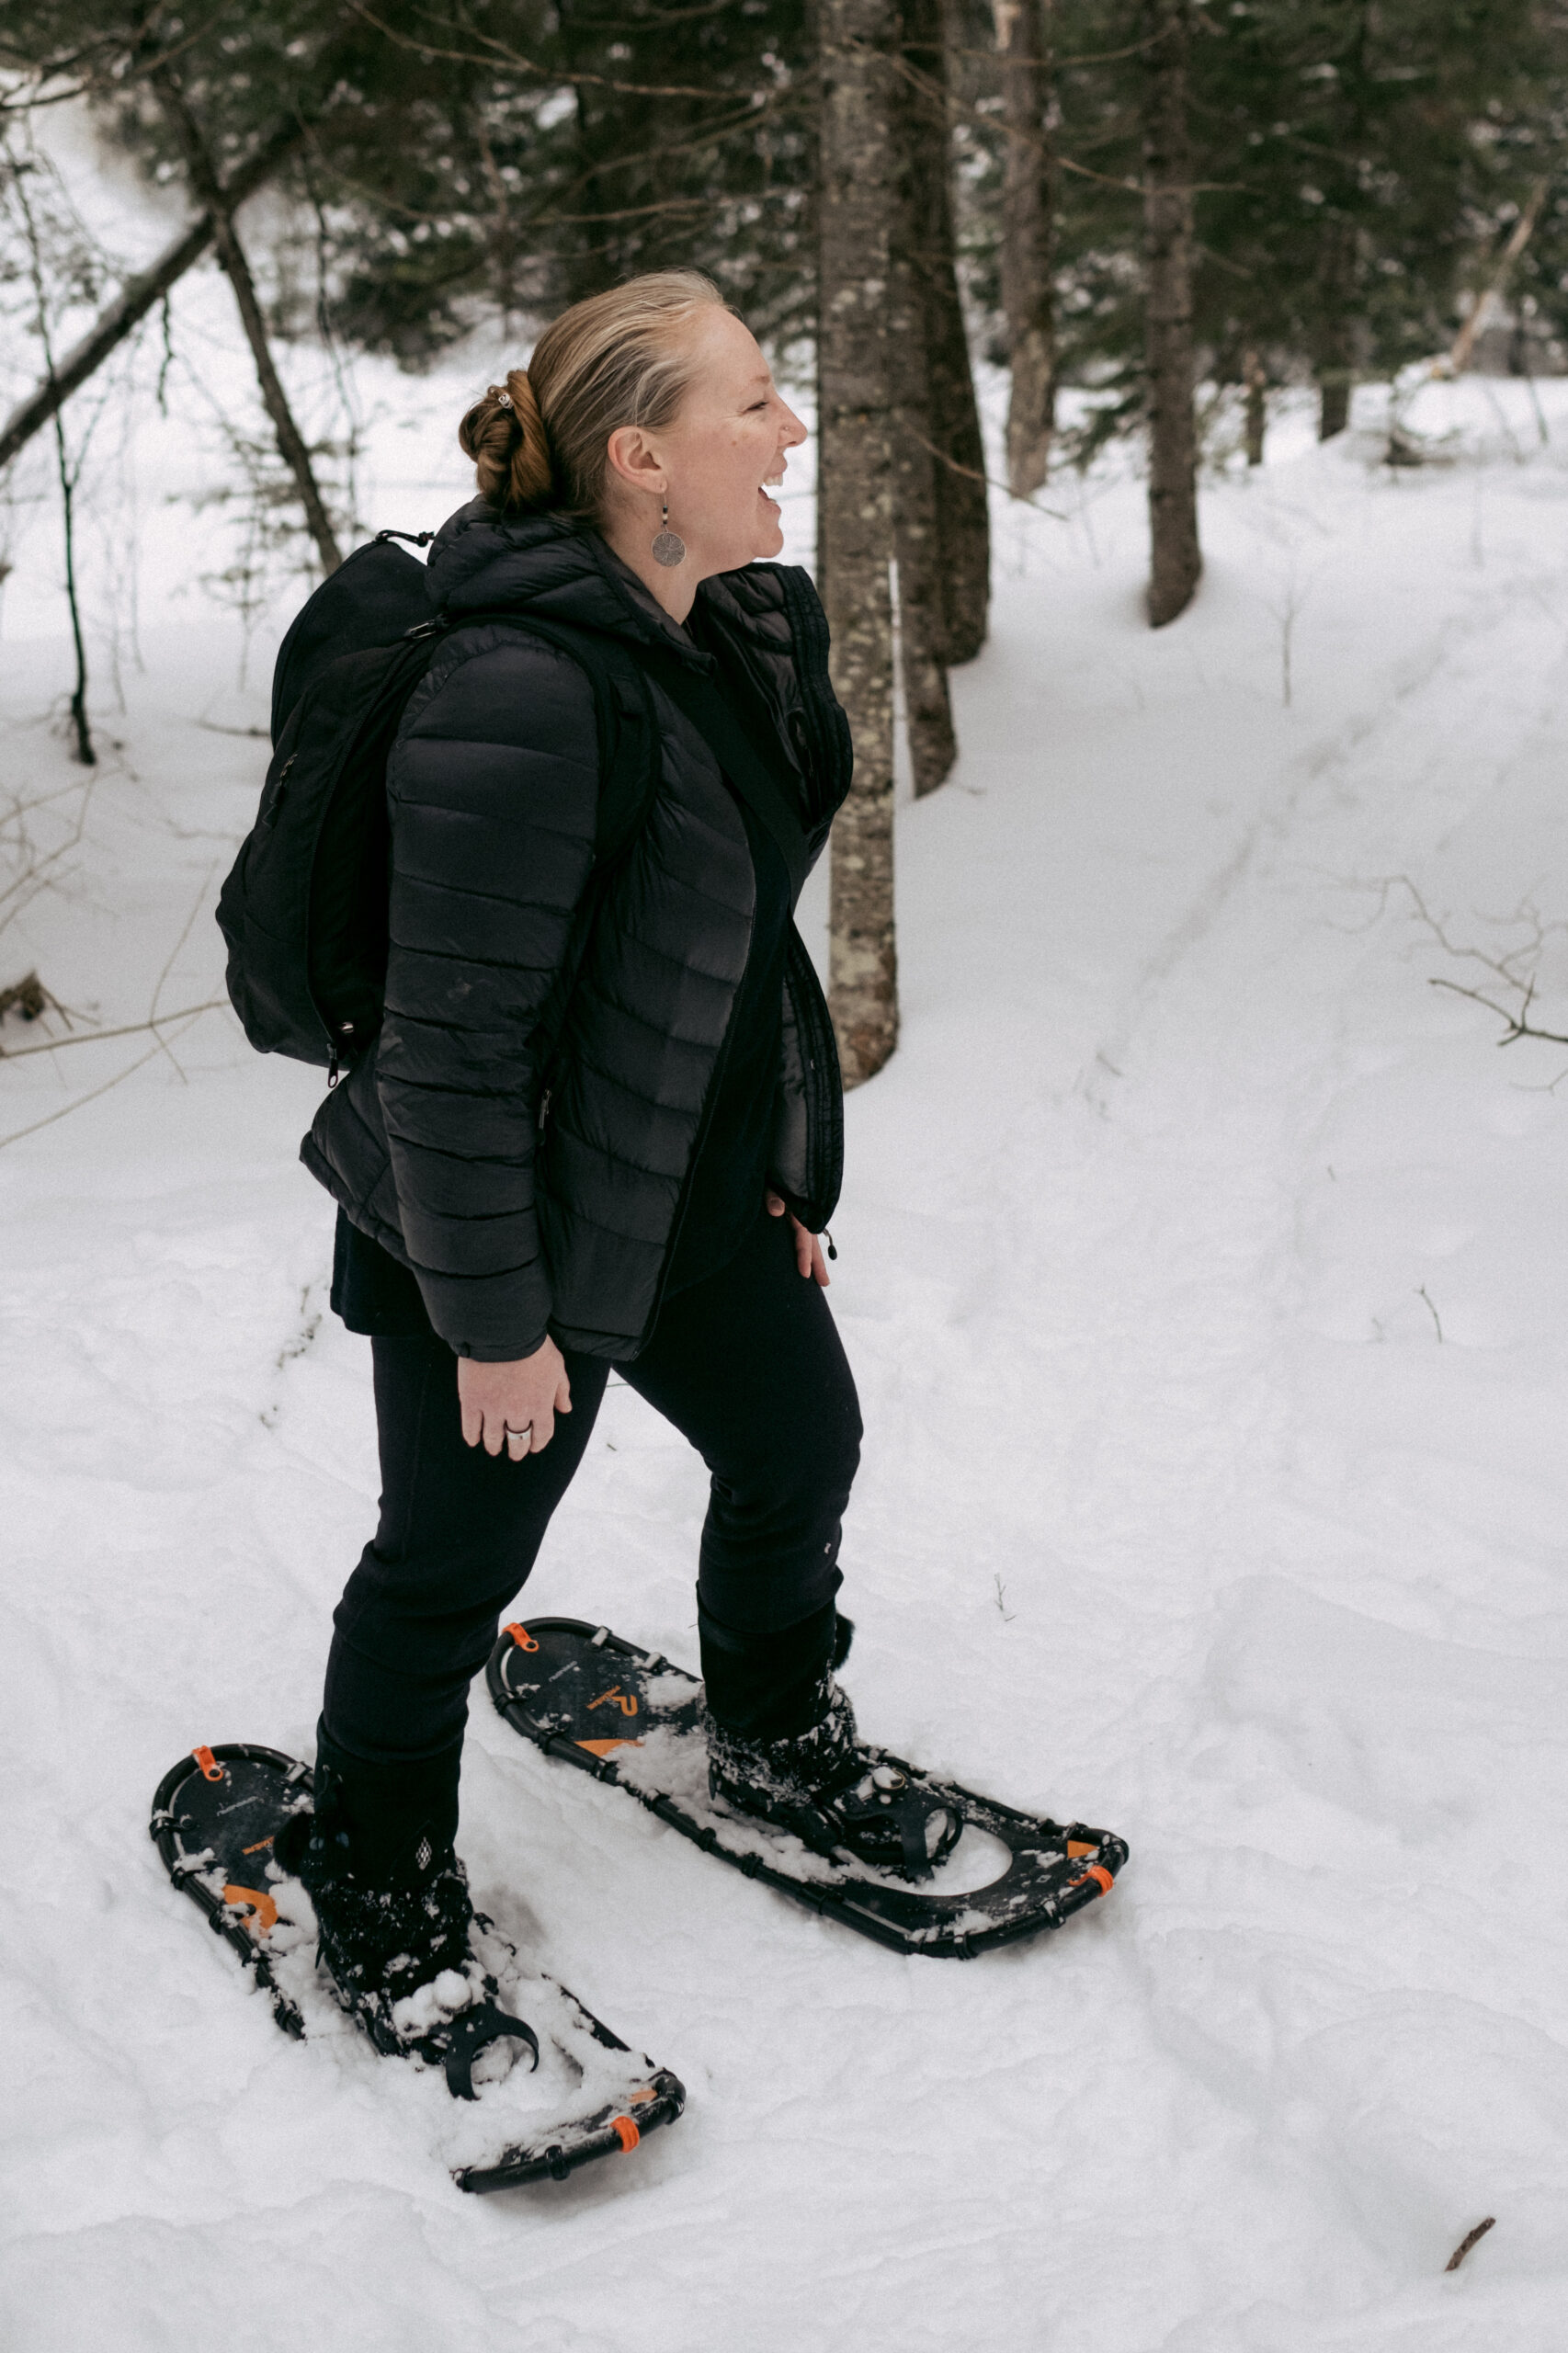 Shannon Hall leading a snowshoeing activity